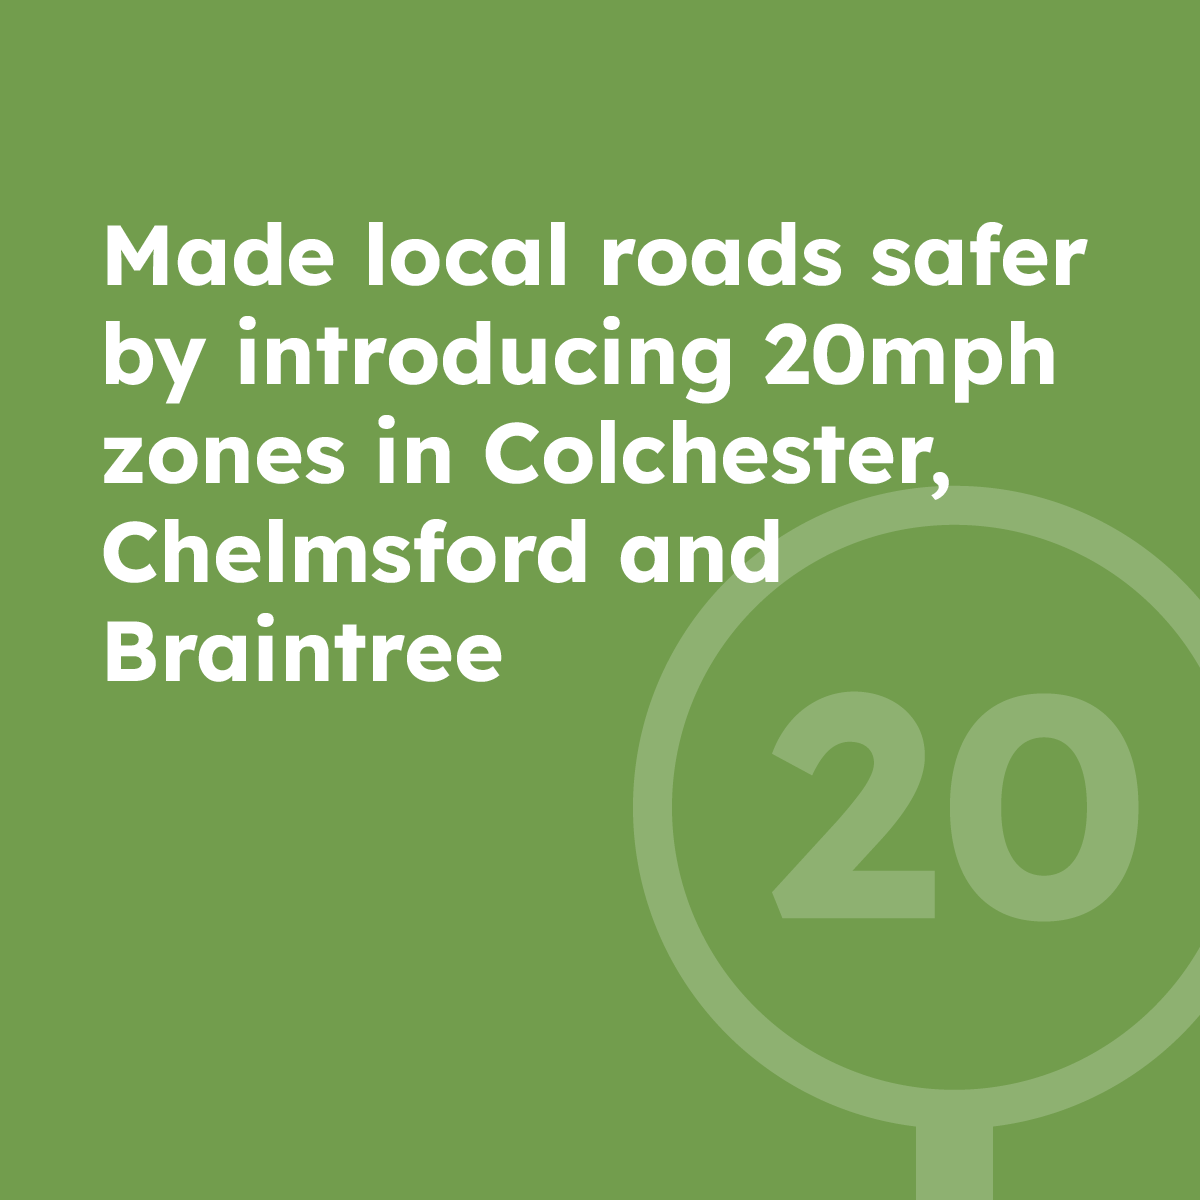 Made local roads safer by introducing 20mph zones in Colchester and Braintree